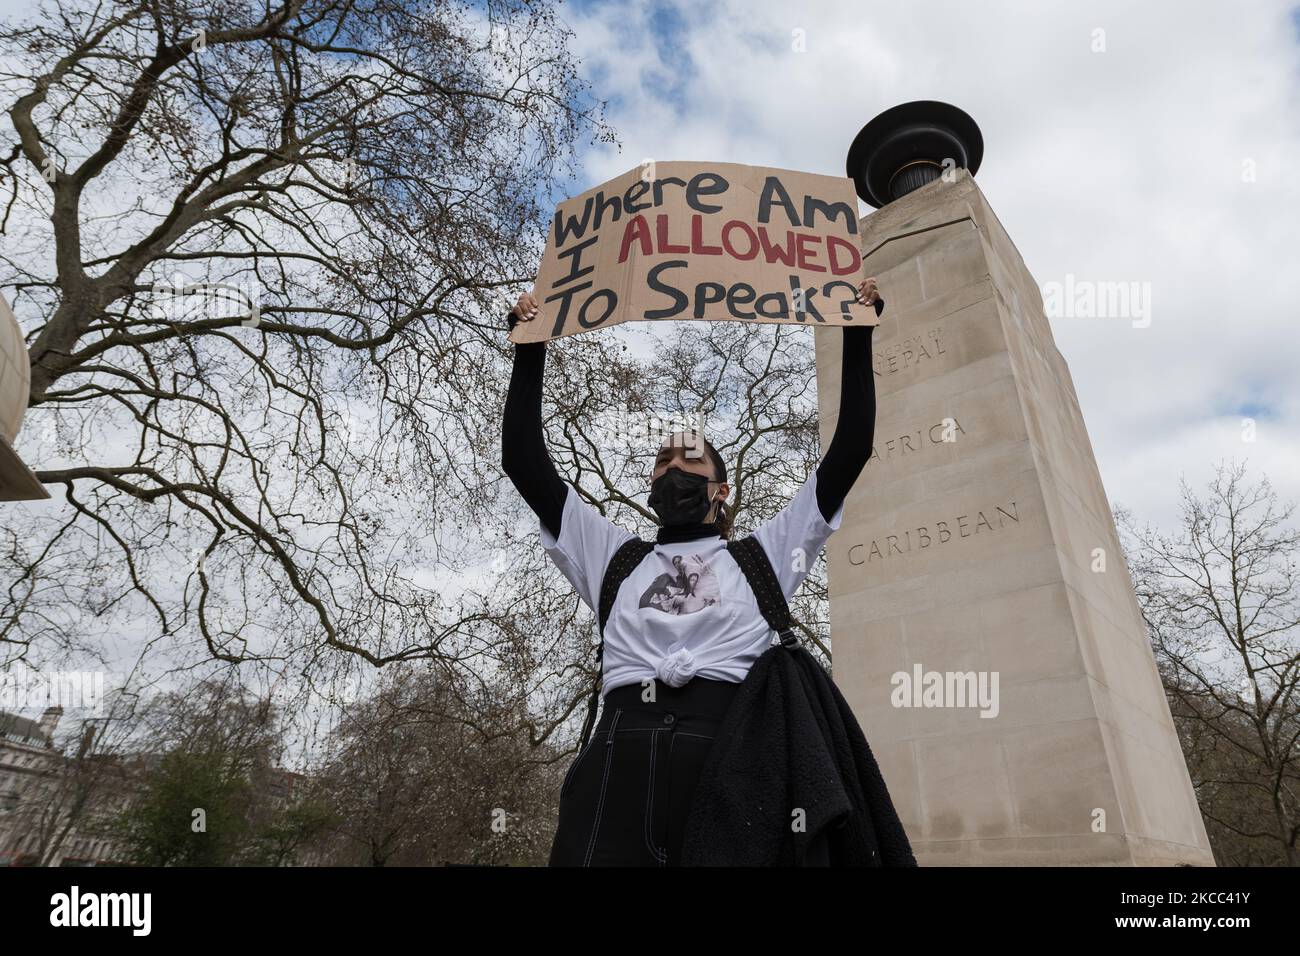 LONDON, UNITED KINGDOM - APRIL 03, 2021: Demonstrators march through central London in a protest against government’s Police, Crime, Sentencing and Courts Bill, which would give officers and the Home Secretary new powers to impose conditions on protests and public processions, on 03 April, 2021 in London, England. The demonstration is part of a national day of action with protests happening across the UK. (Photo by WIktor Szymanowicz/NurPhoto) Stock Photo